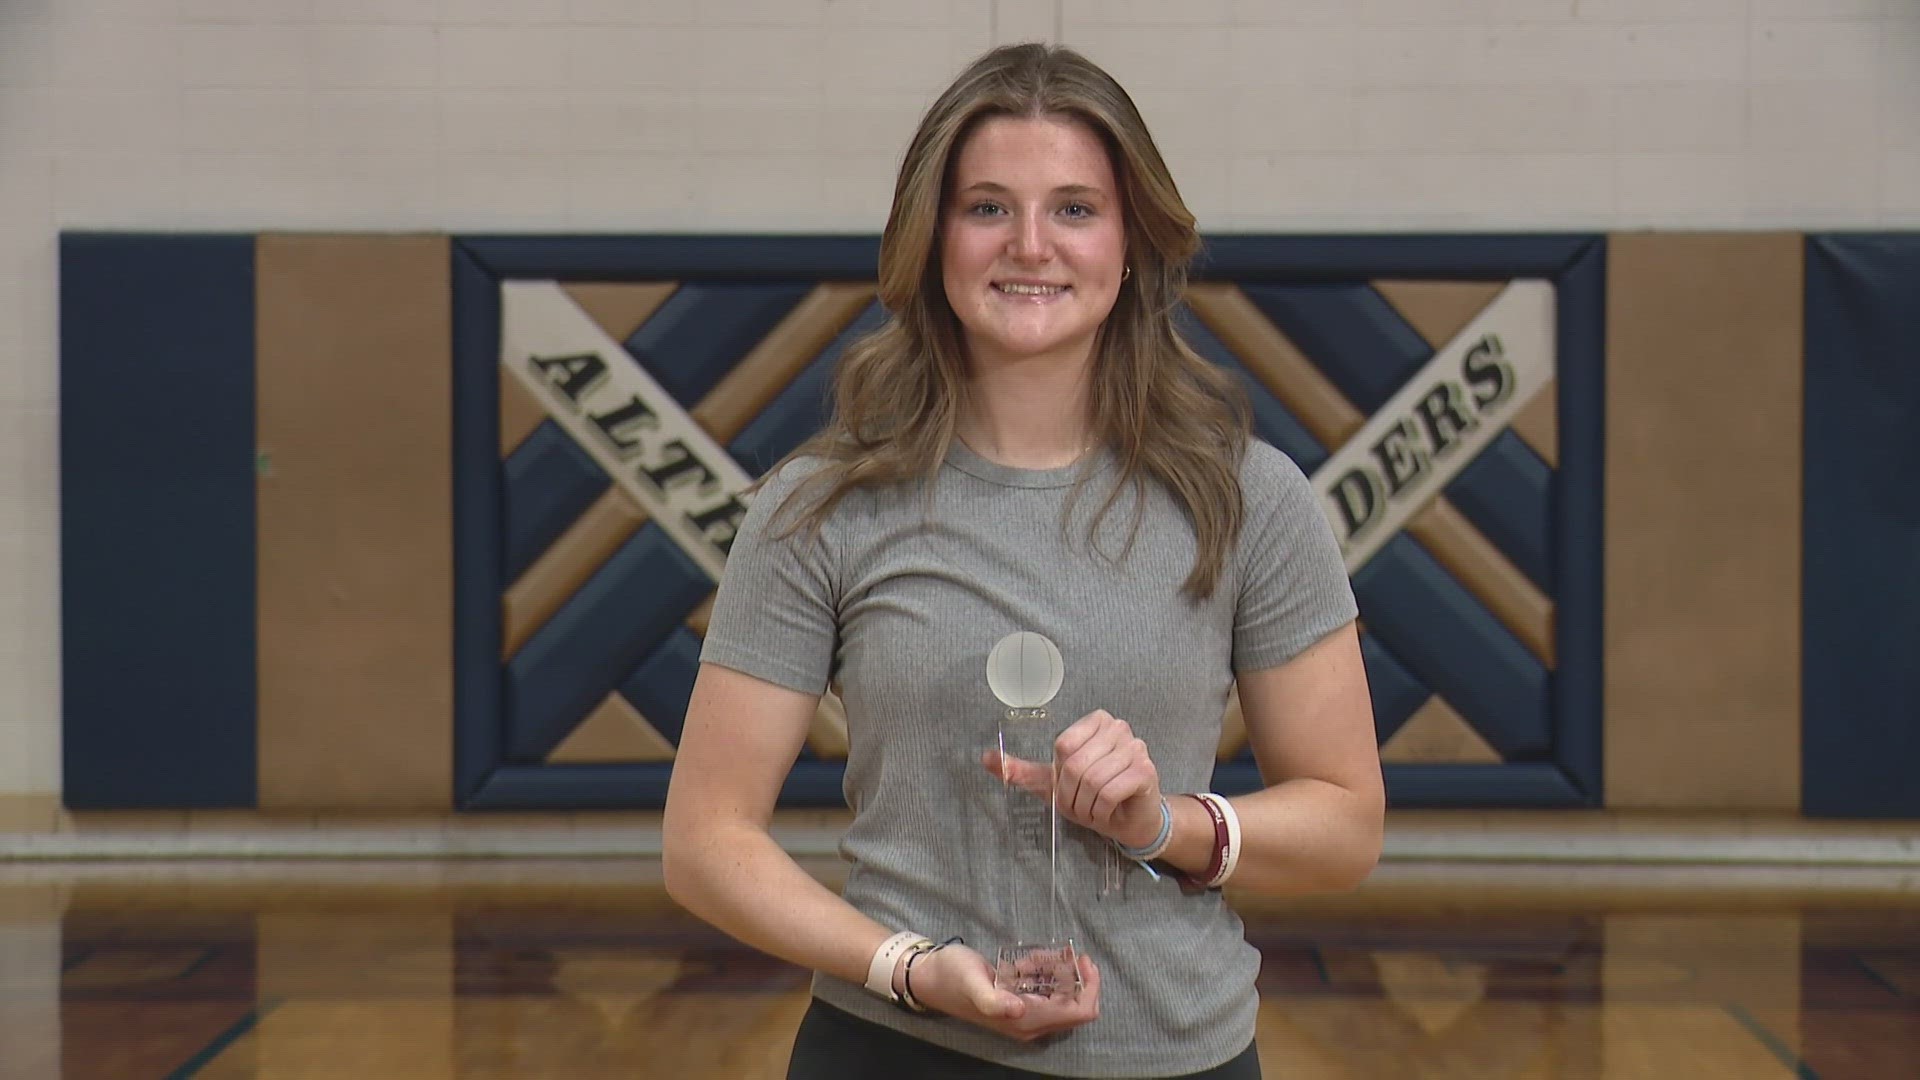 Gabby Orlet, Althoff's star athlete, has been fighting cancer for the last three years. Her approach to life has earned her national recognition for her courage.